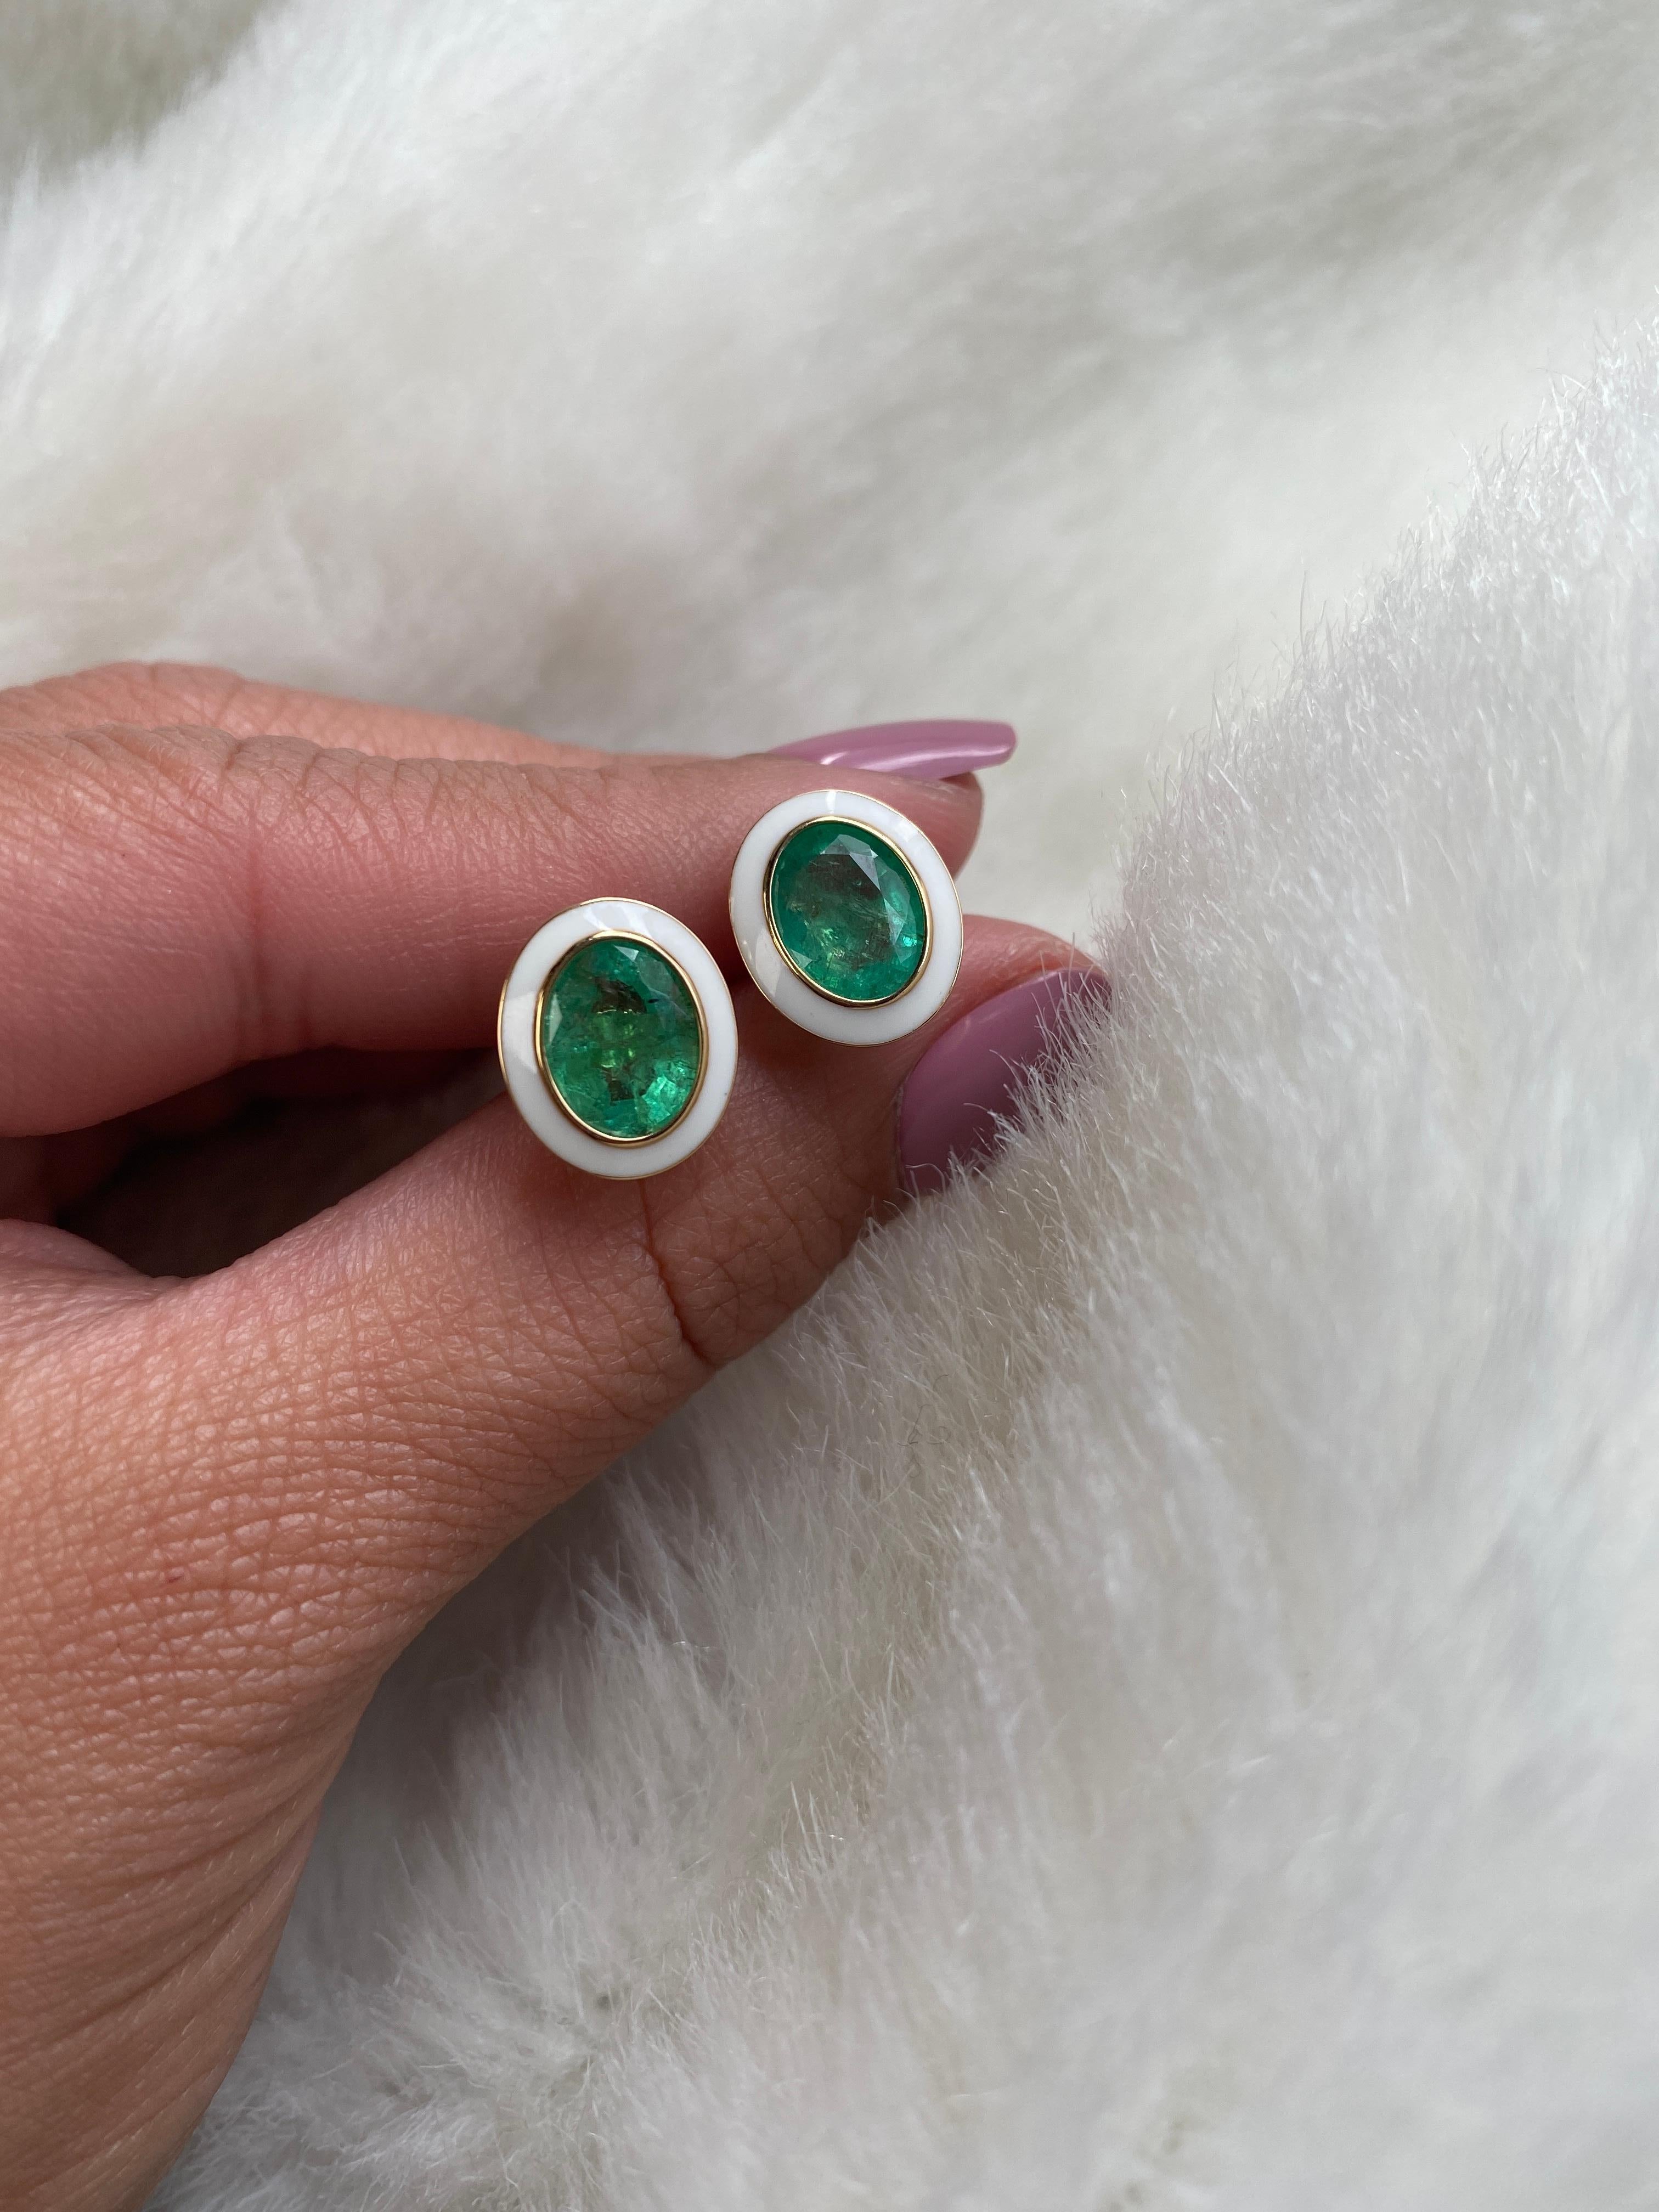 Emerald Oval Studs with White Enamel in 18K Yellow Gold, from 'Queen' Collection. The combination of enamel, and Emerald represents power, richness and passion of a true Queen. The feeling of luxury is what we’re aiming for, but at a price point